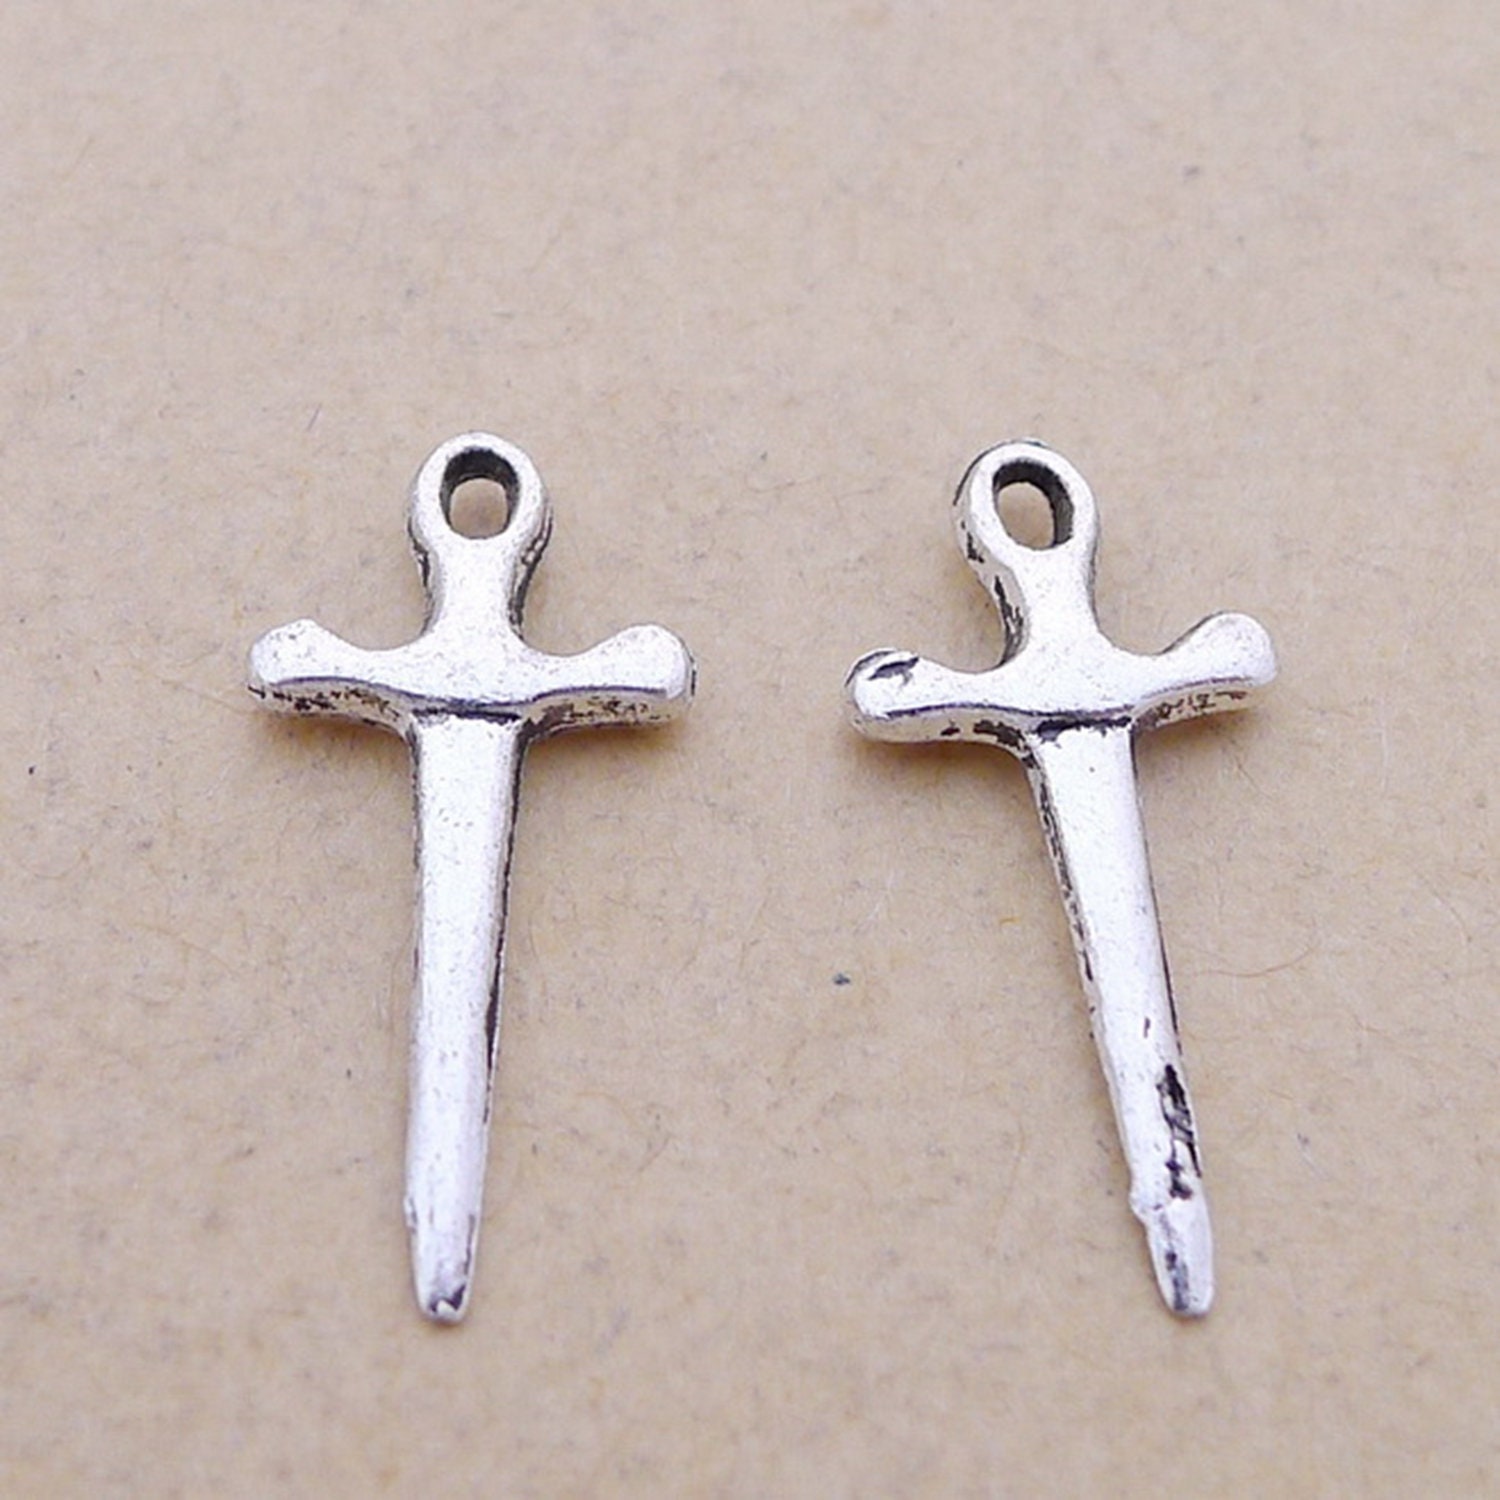 80Pcs Cross Charms Pendants Alloy Easter Holidays Jewelry Findings